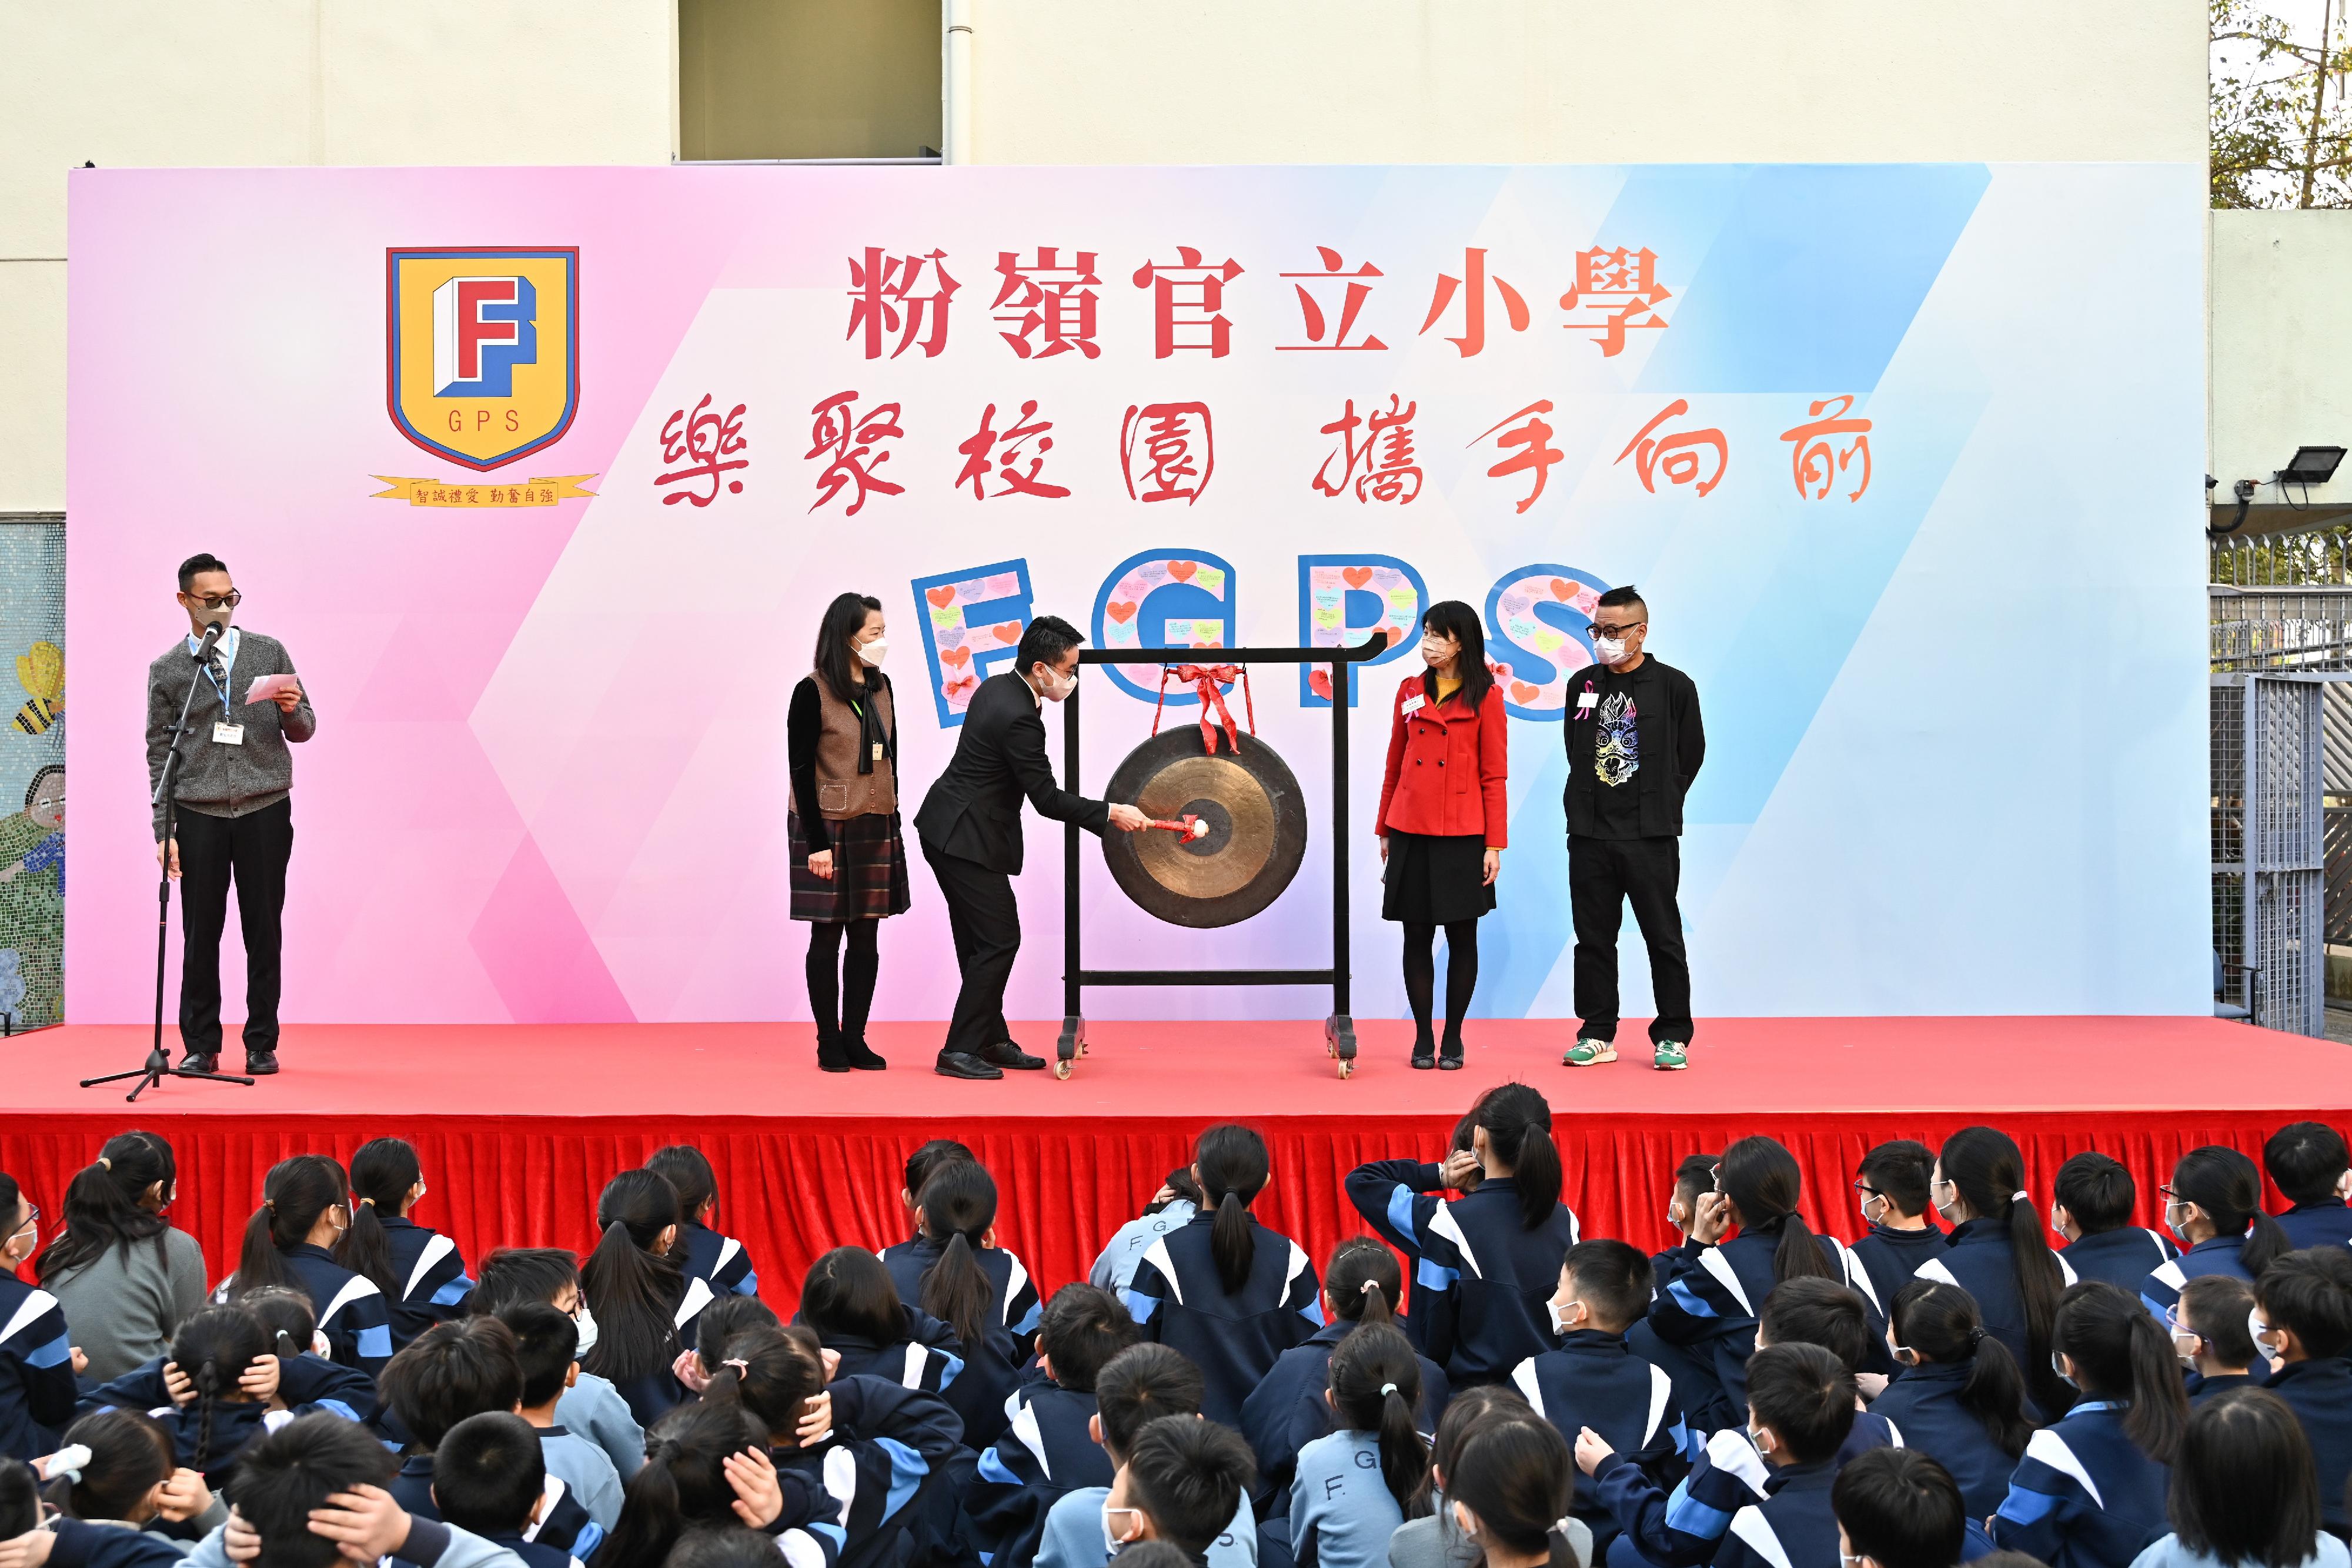 The Under Secretary for Education, Mr Sze Chun-fai, visited Fanling Government Primary School this morning (February 22) to learn about the class resumption of cross-boundary students. Photo shows Mr Sze (third left) striking a gong to mark a new start for the school and students.